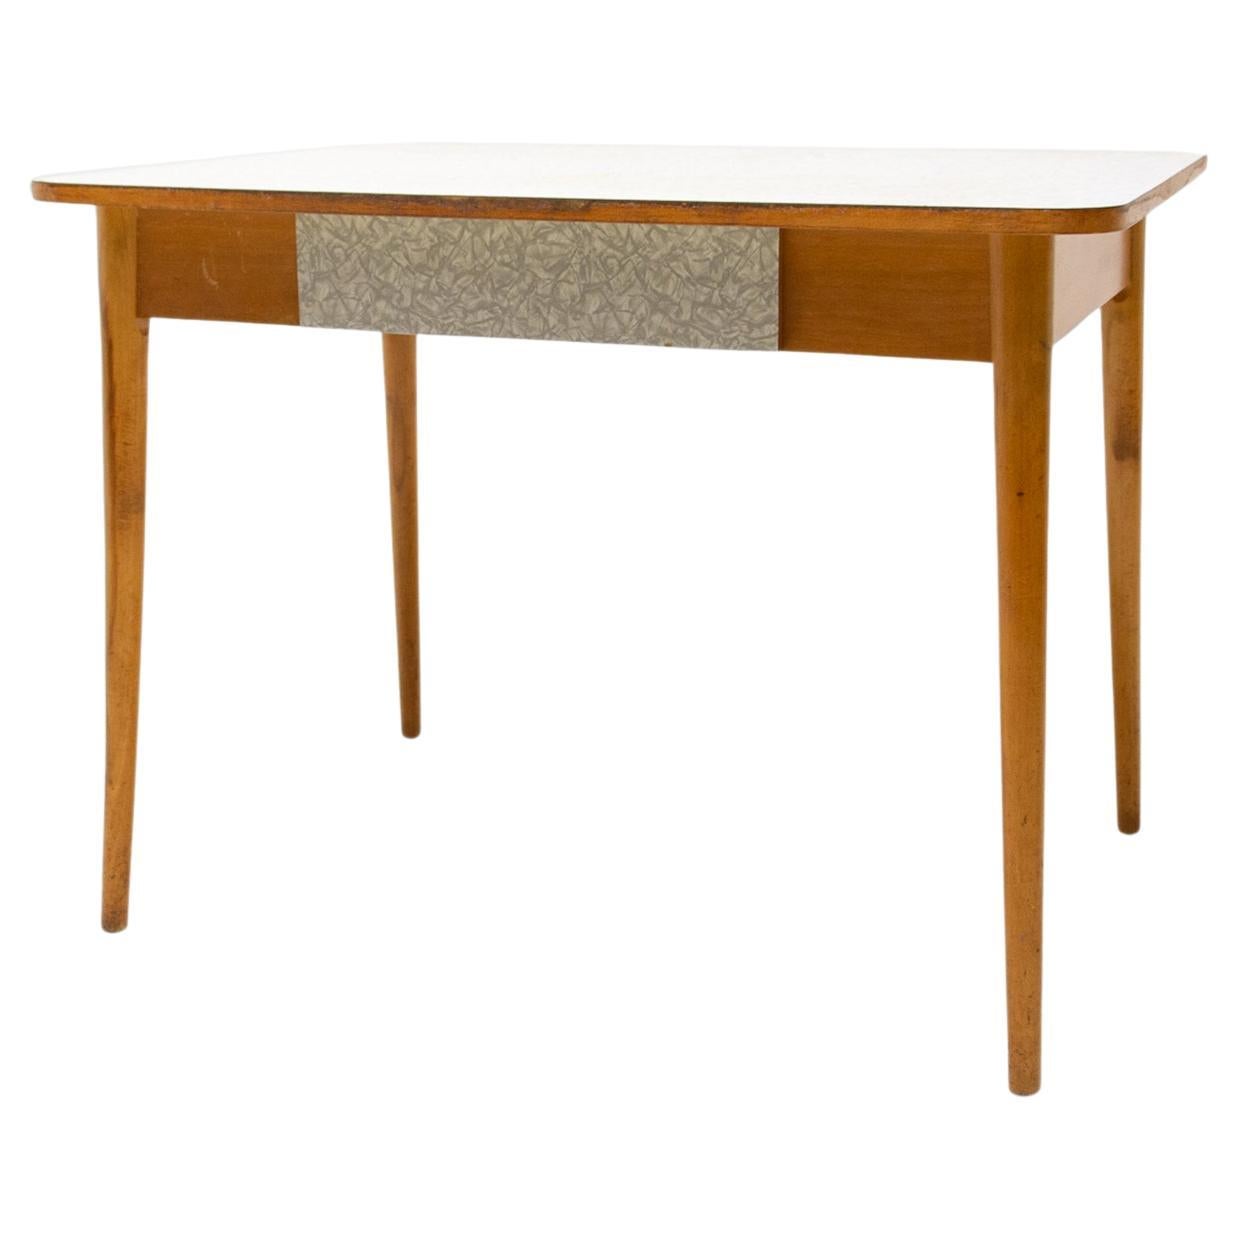  Midcentury Formica and Wood Central Table, Czechoslovakia, 1960's